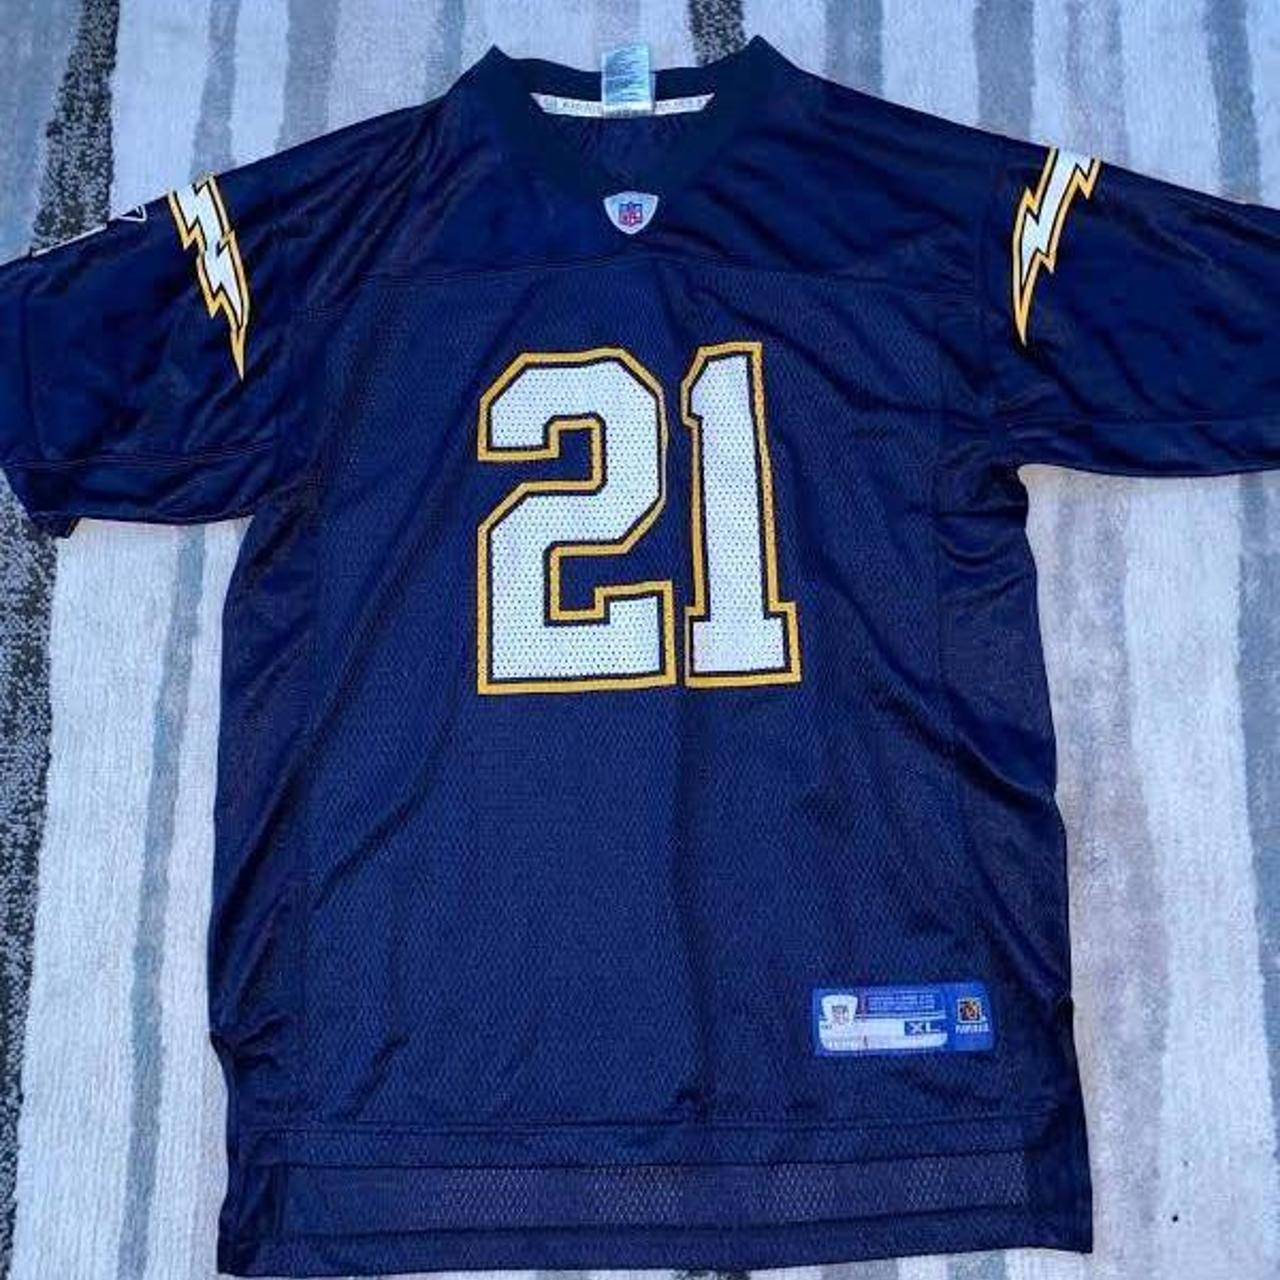 Super clean Old San Diego Chargers Ladainian - Depop